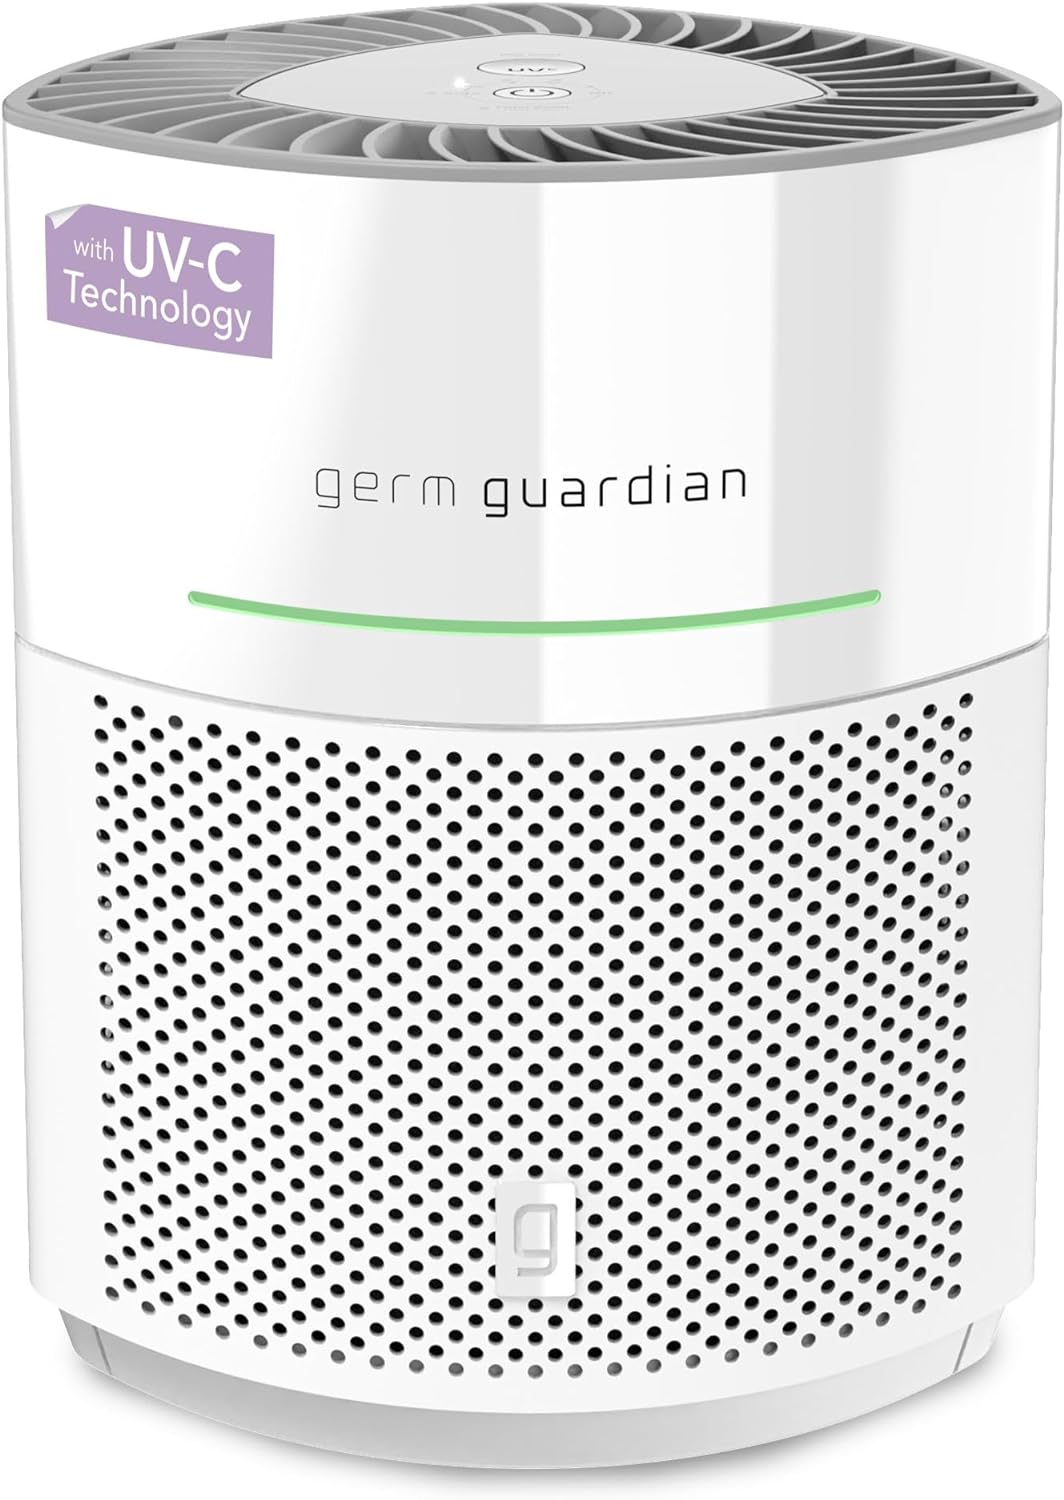 GermGuardian Airsafe+ Home Air Purifiers, HEPA Air Purifiers for Home, UV C Light, Air Quality Sensor, 360 HEPA Filter, Covers 1040 Sq.Ft, White AC3000W